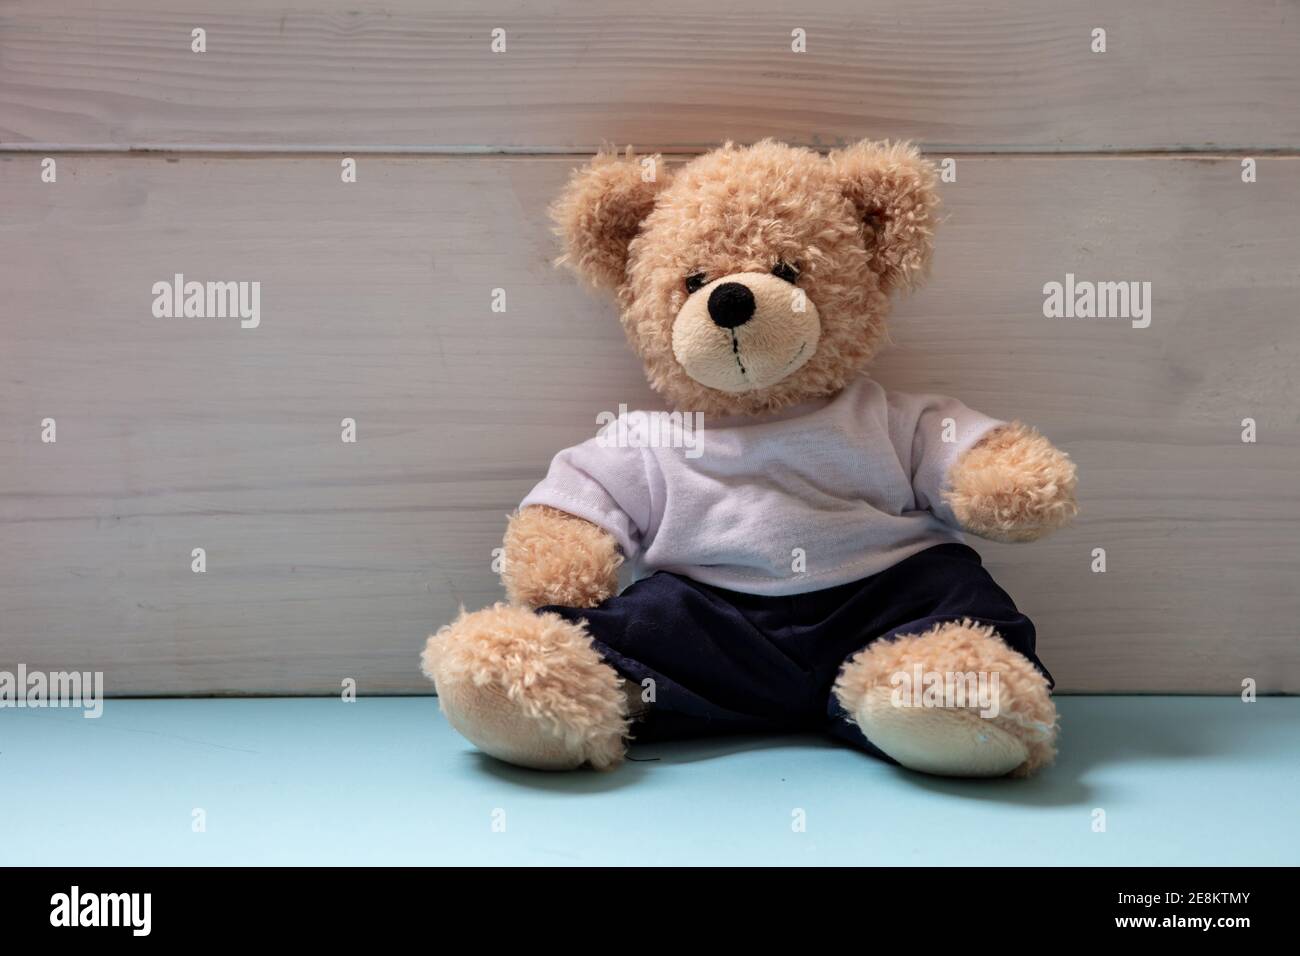 Teddy bear wearing blue trousers and white t shirt sitting in an empty room, Kid alone concept Stock Photo